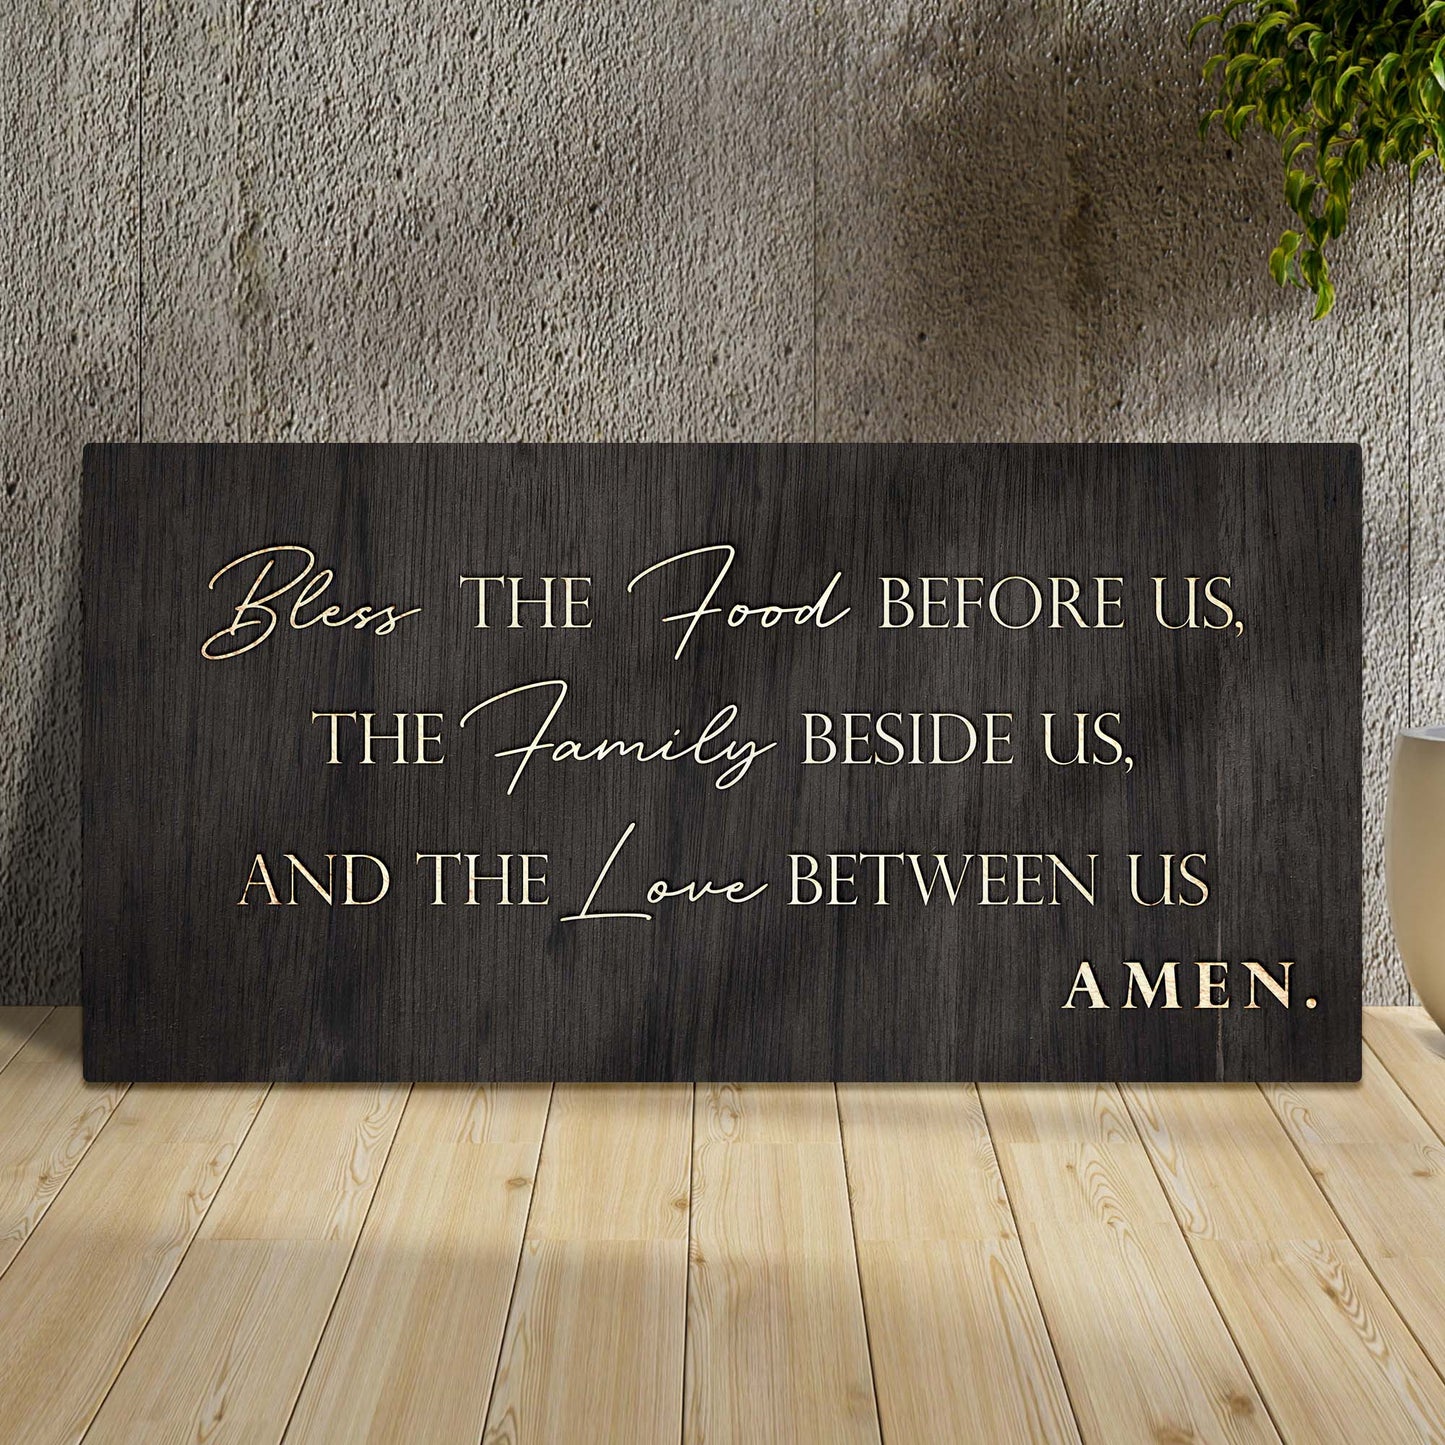 Bless The Food, Family, And Love Sign II  - Image by Tailored Canvases